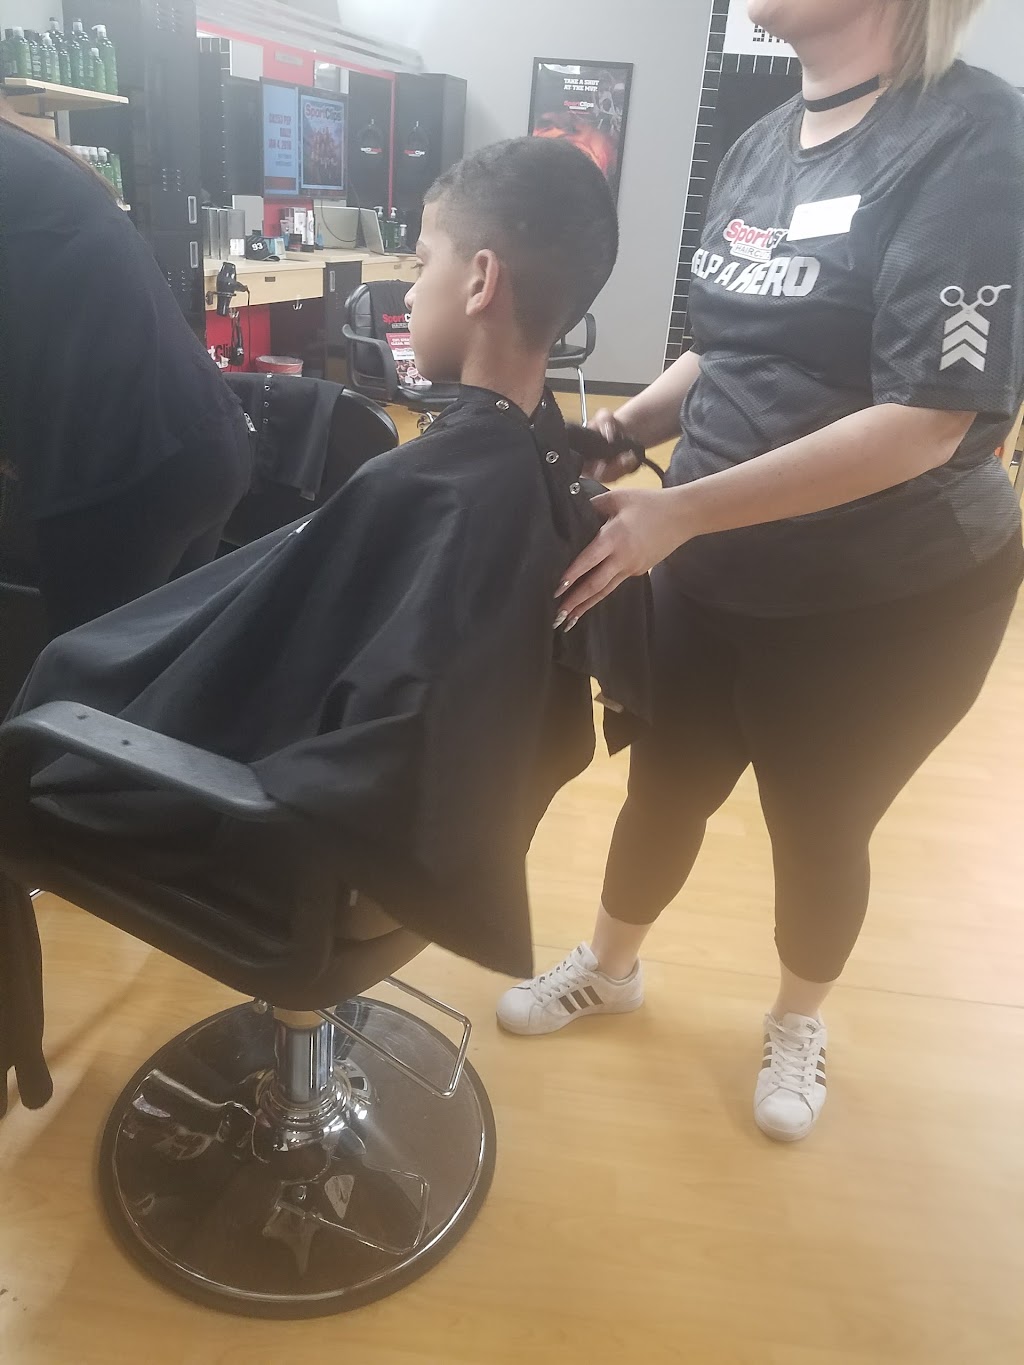 Sport Clips Haircuts of Modesto - North Point Landing | 3848 McHenry Ave Suite #160, Modesto, CA 95356, USA | Phone: (209) 272-7002